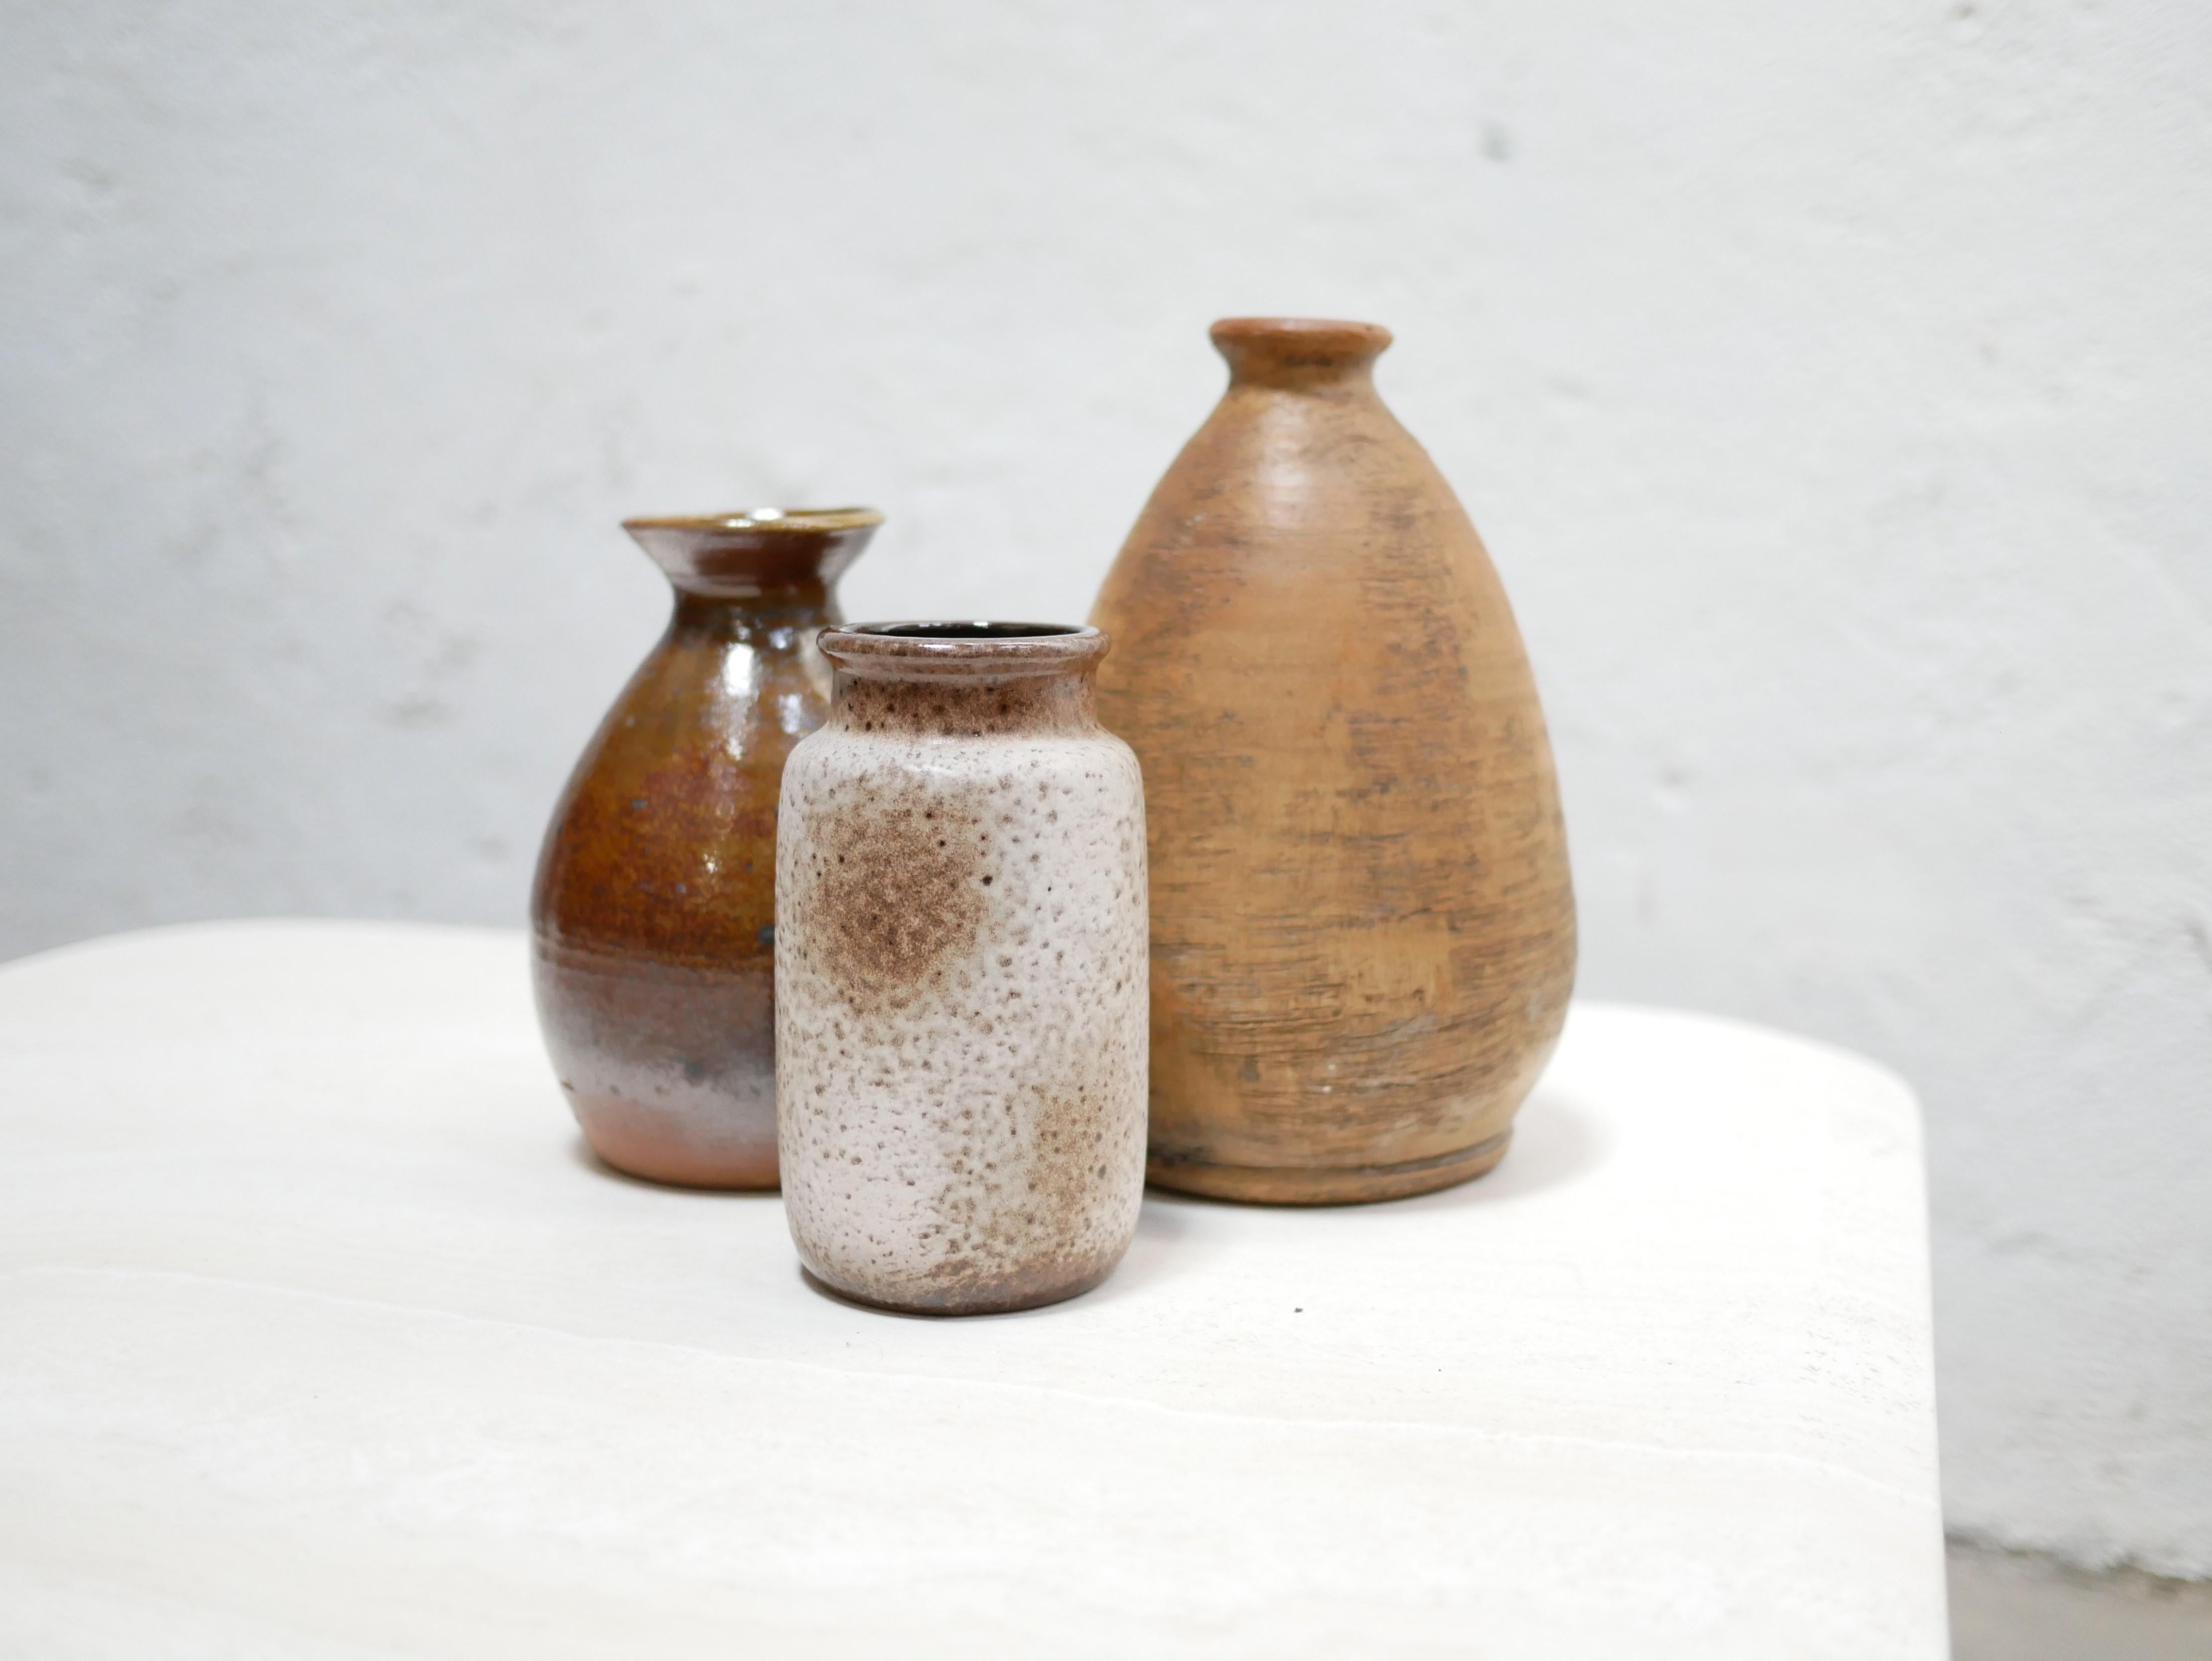 Stoneware vase designed in France in the 1960s.

With its modern shape and its raw mineral color, this ceramic will be perfect in a natural, refined and delicate decoration.
We simply imagine it placed on a shelf or a piece of furniture, decorated